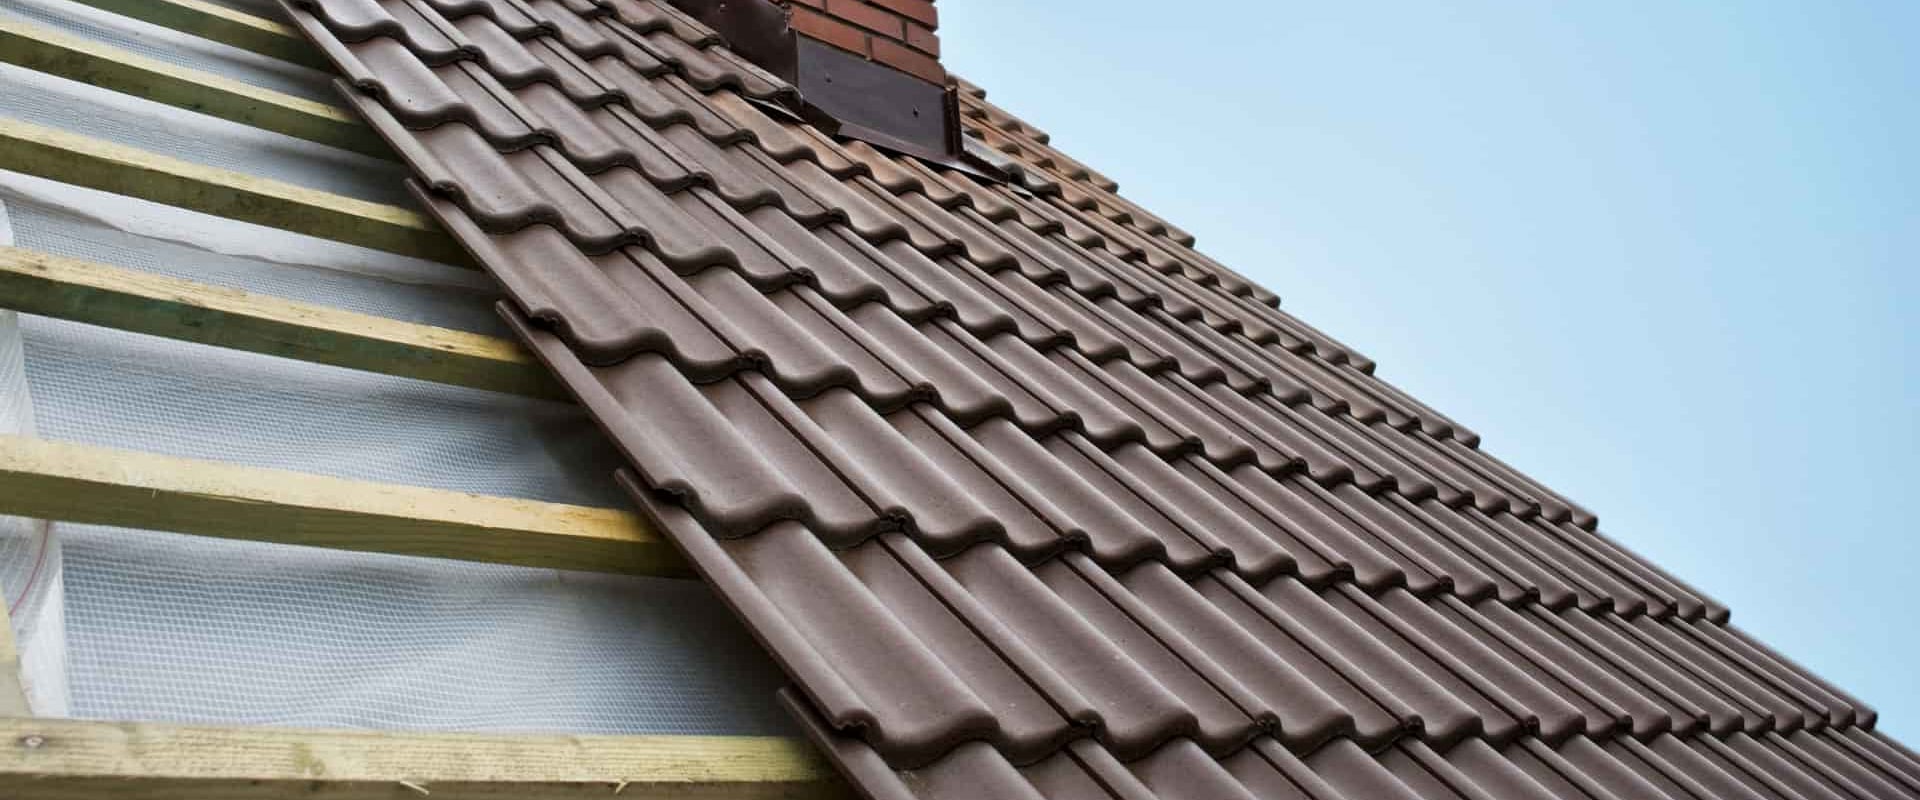 How long does it take to replace the roof?